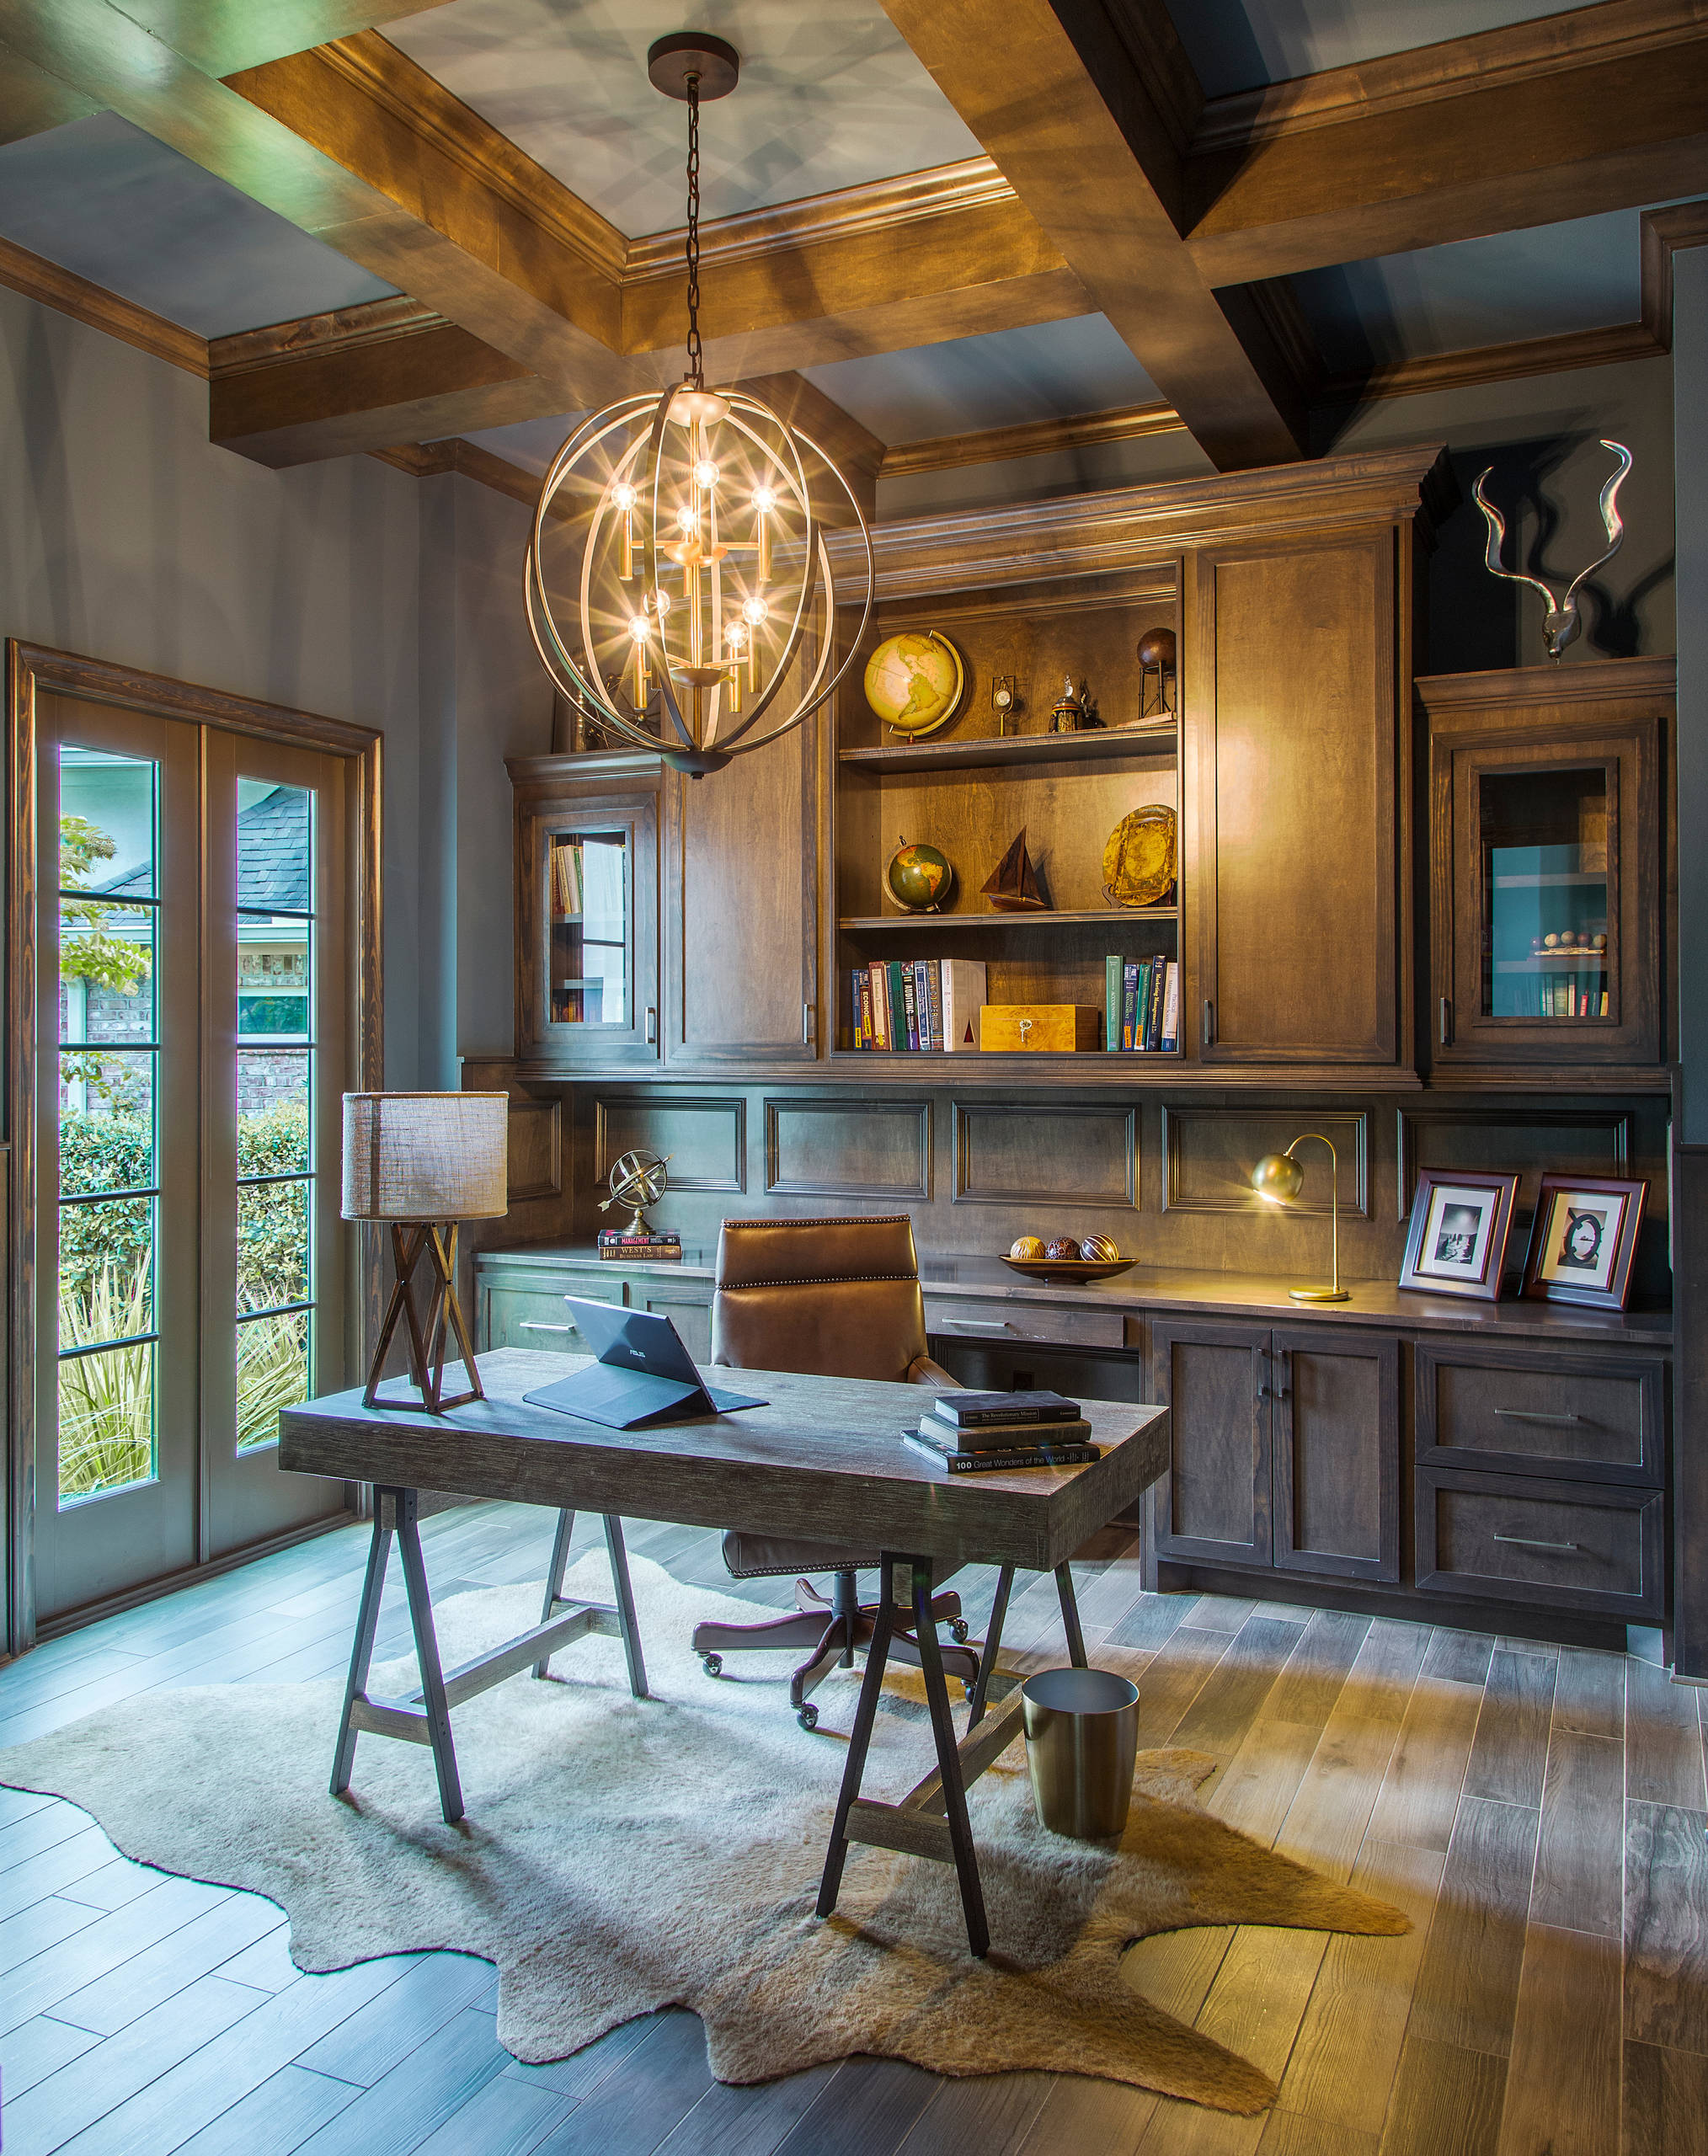 https://st.hzcdn.com/simgs/pictures/home-offices/transitional-home-in-the-heart-of-the-woodlands-by-design-interiors-inc-img~5371a7540993202a_14-3237-1-f7a7804.jpg